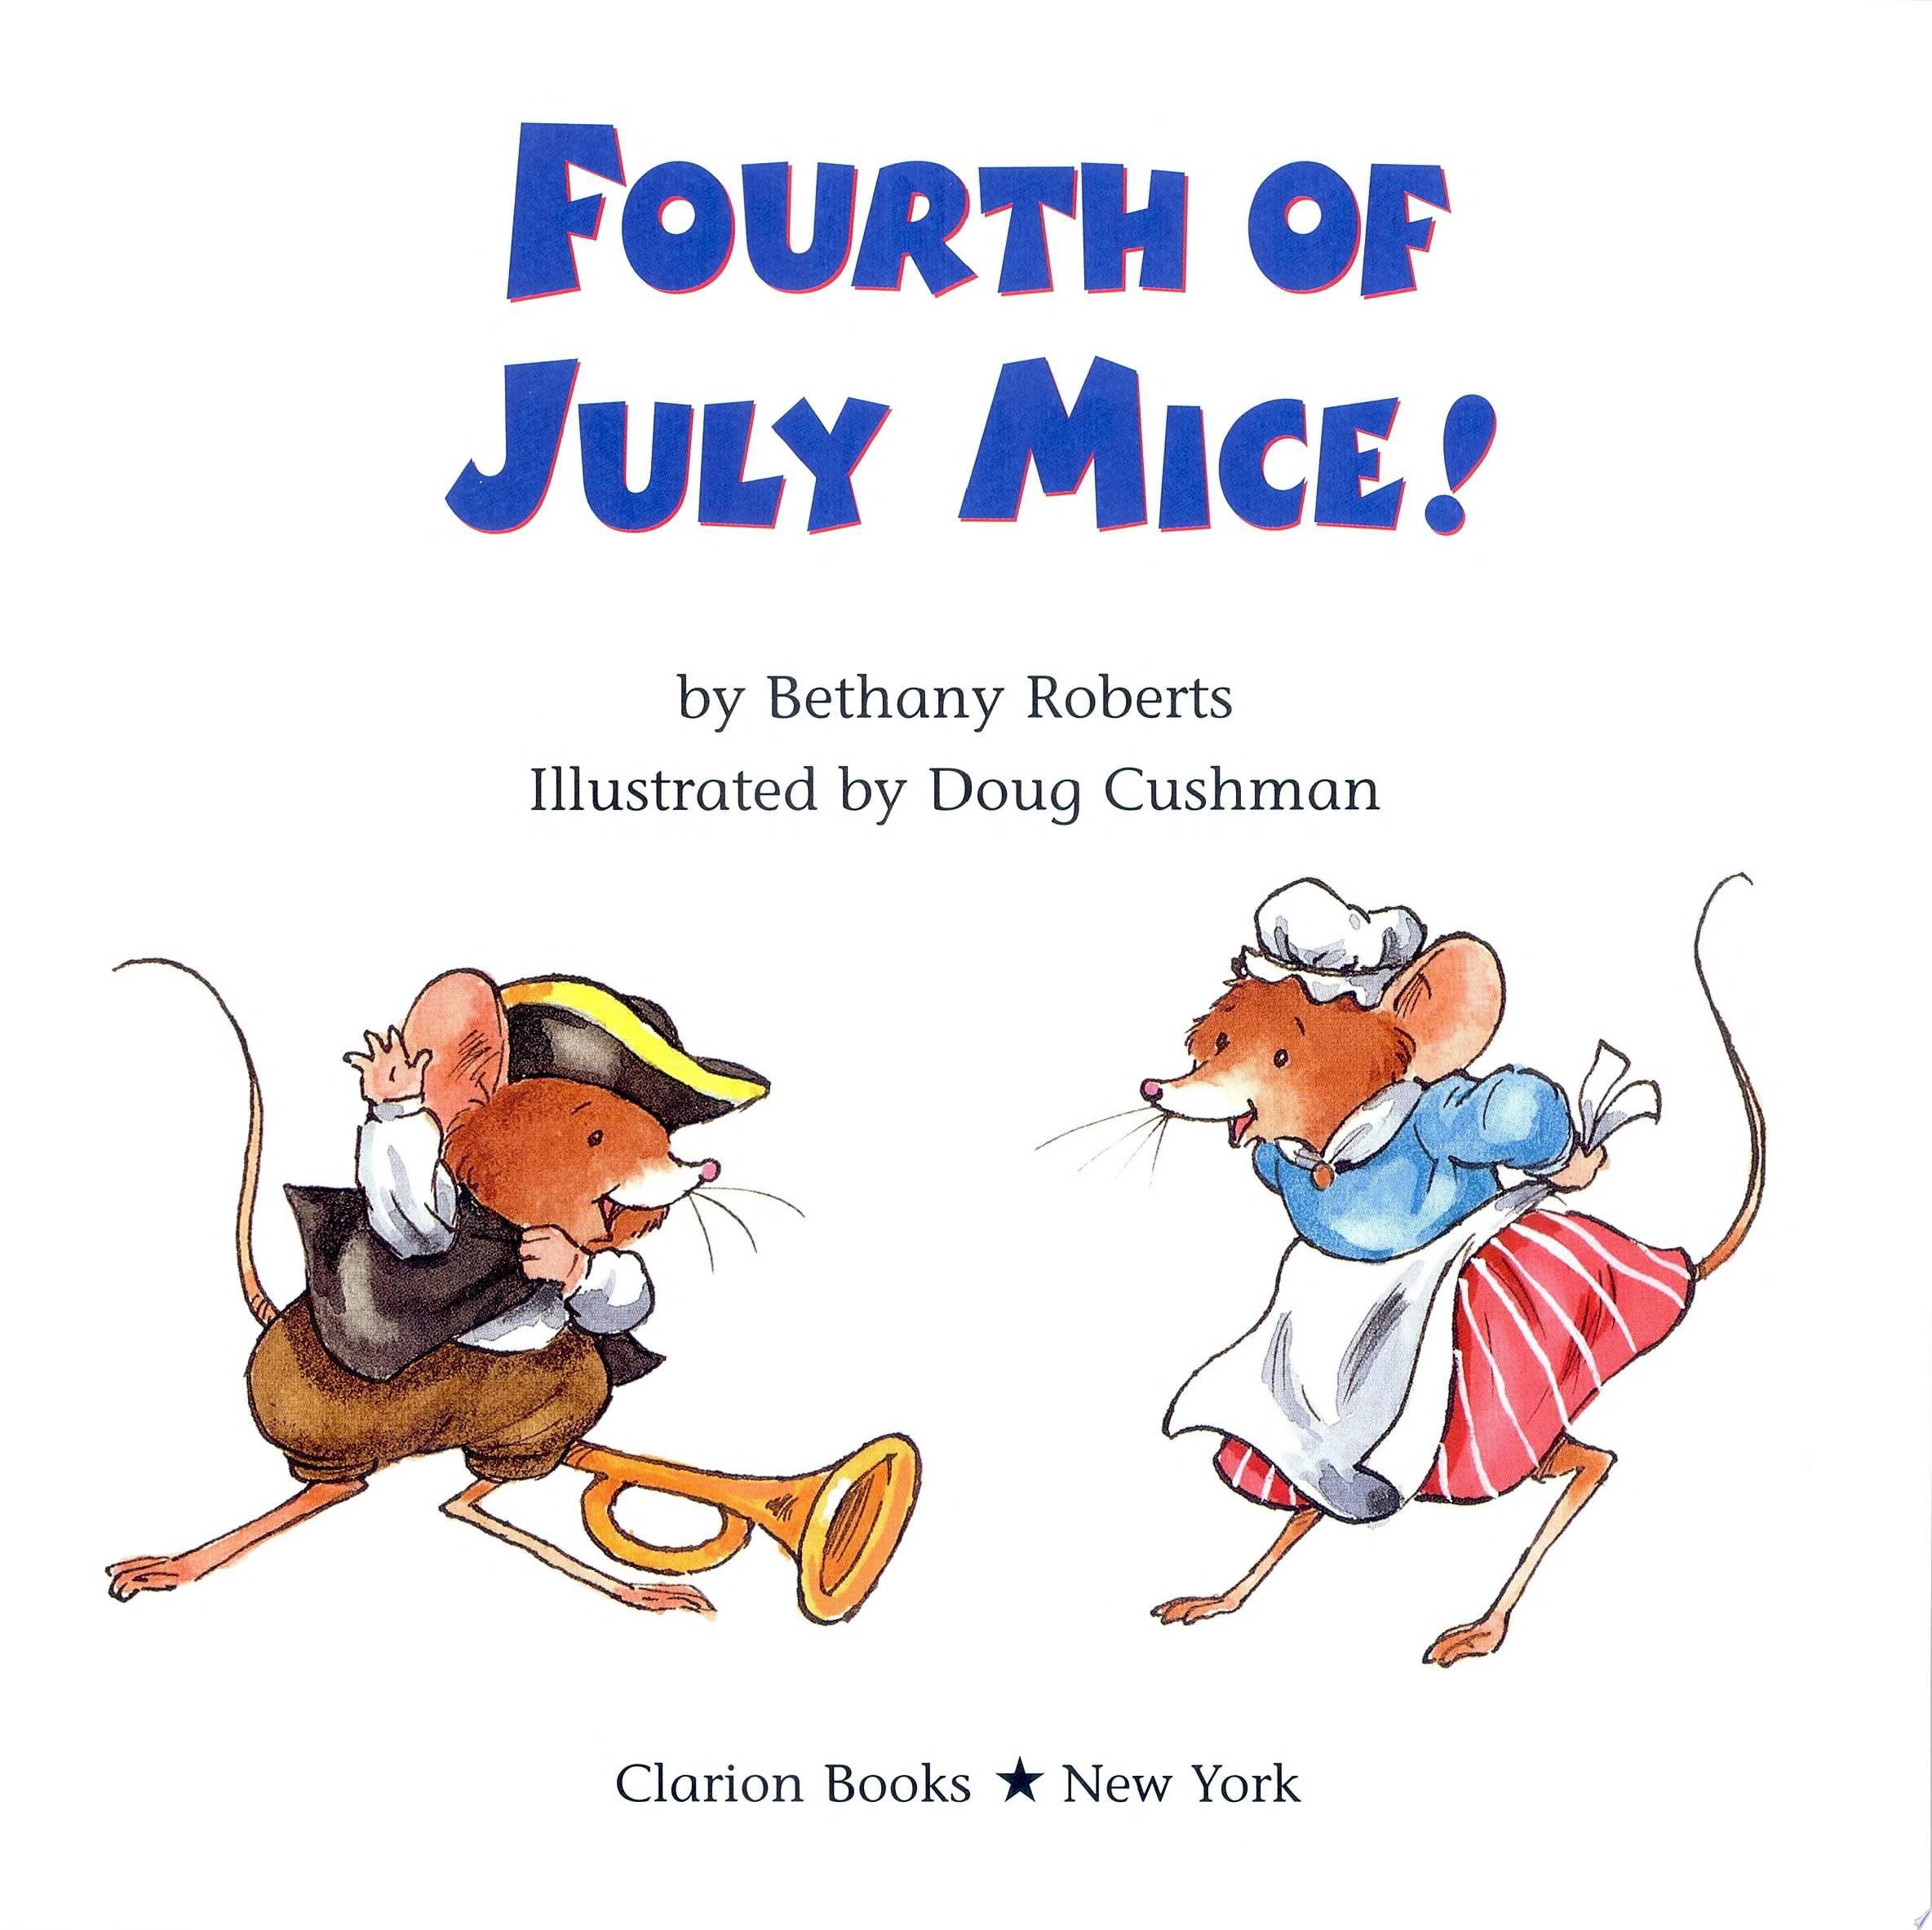 Image for "Fourth of July Mice!"